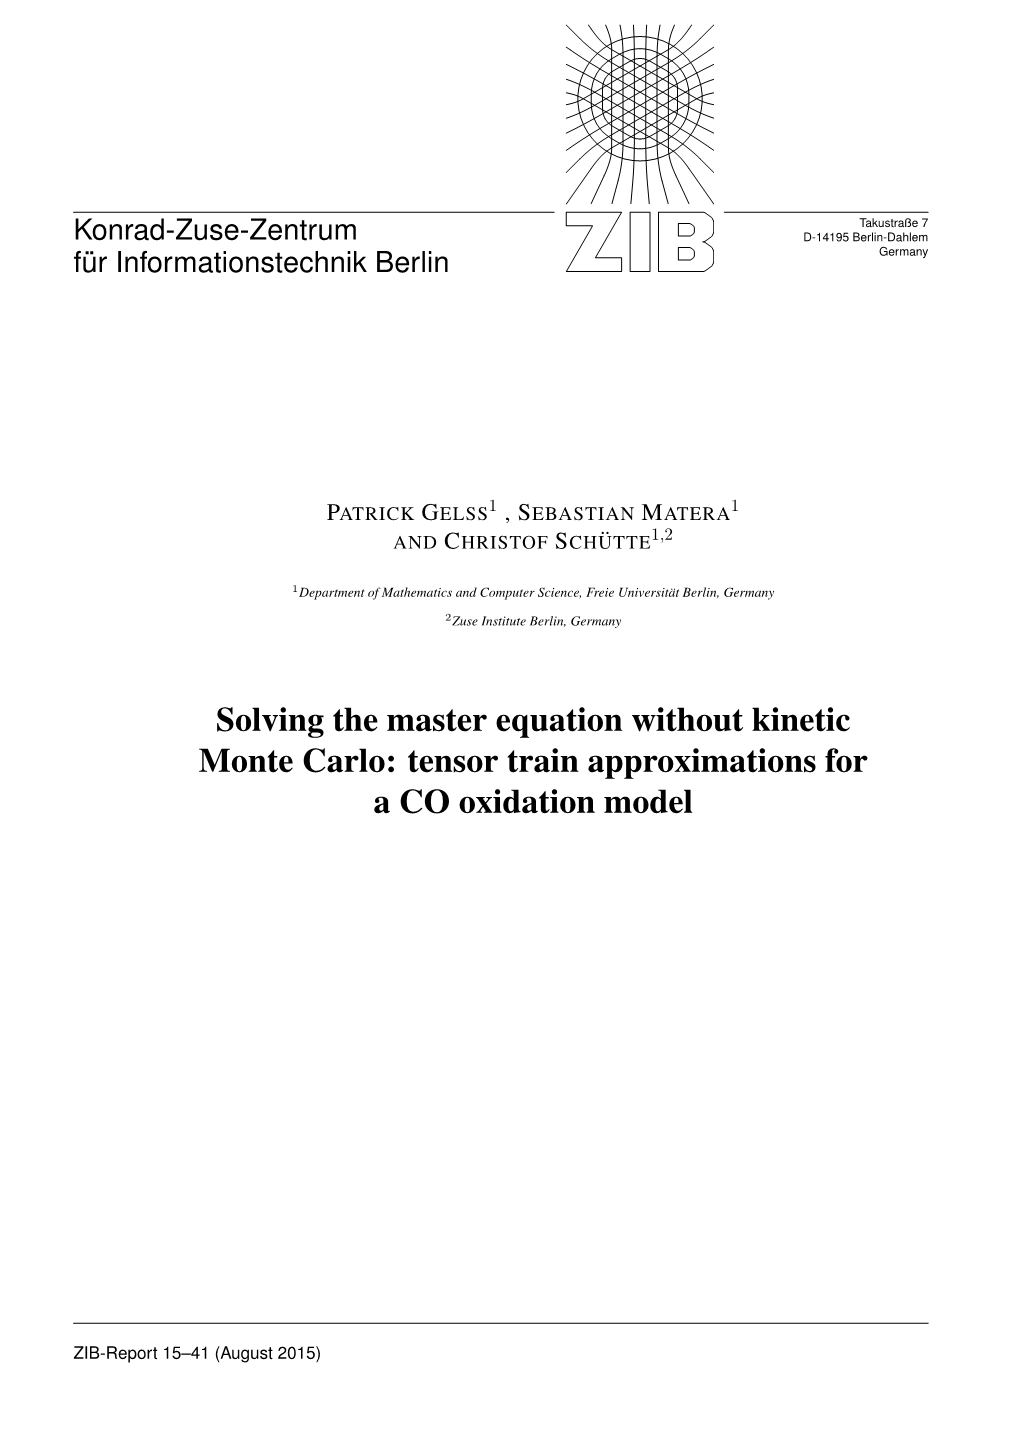 Solving the Master Equation Without Kinetic Monte Carlo: Tensor Train Approximations for a CO Oxidation Model